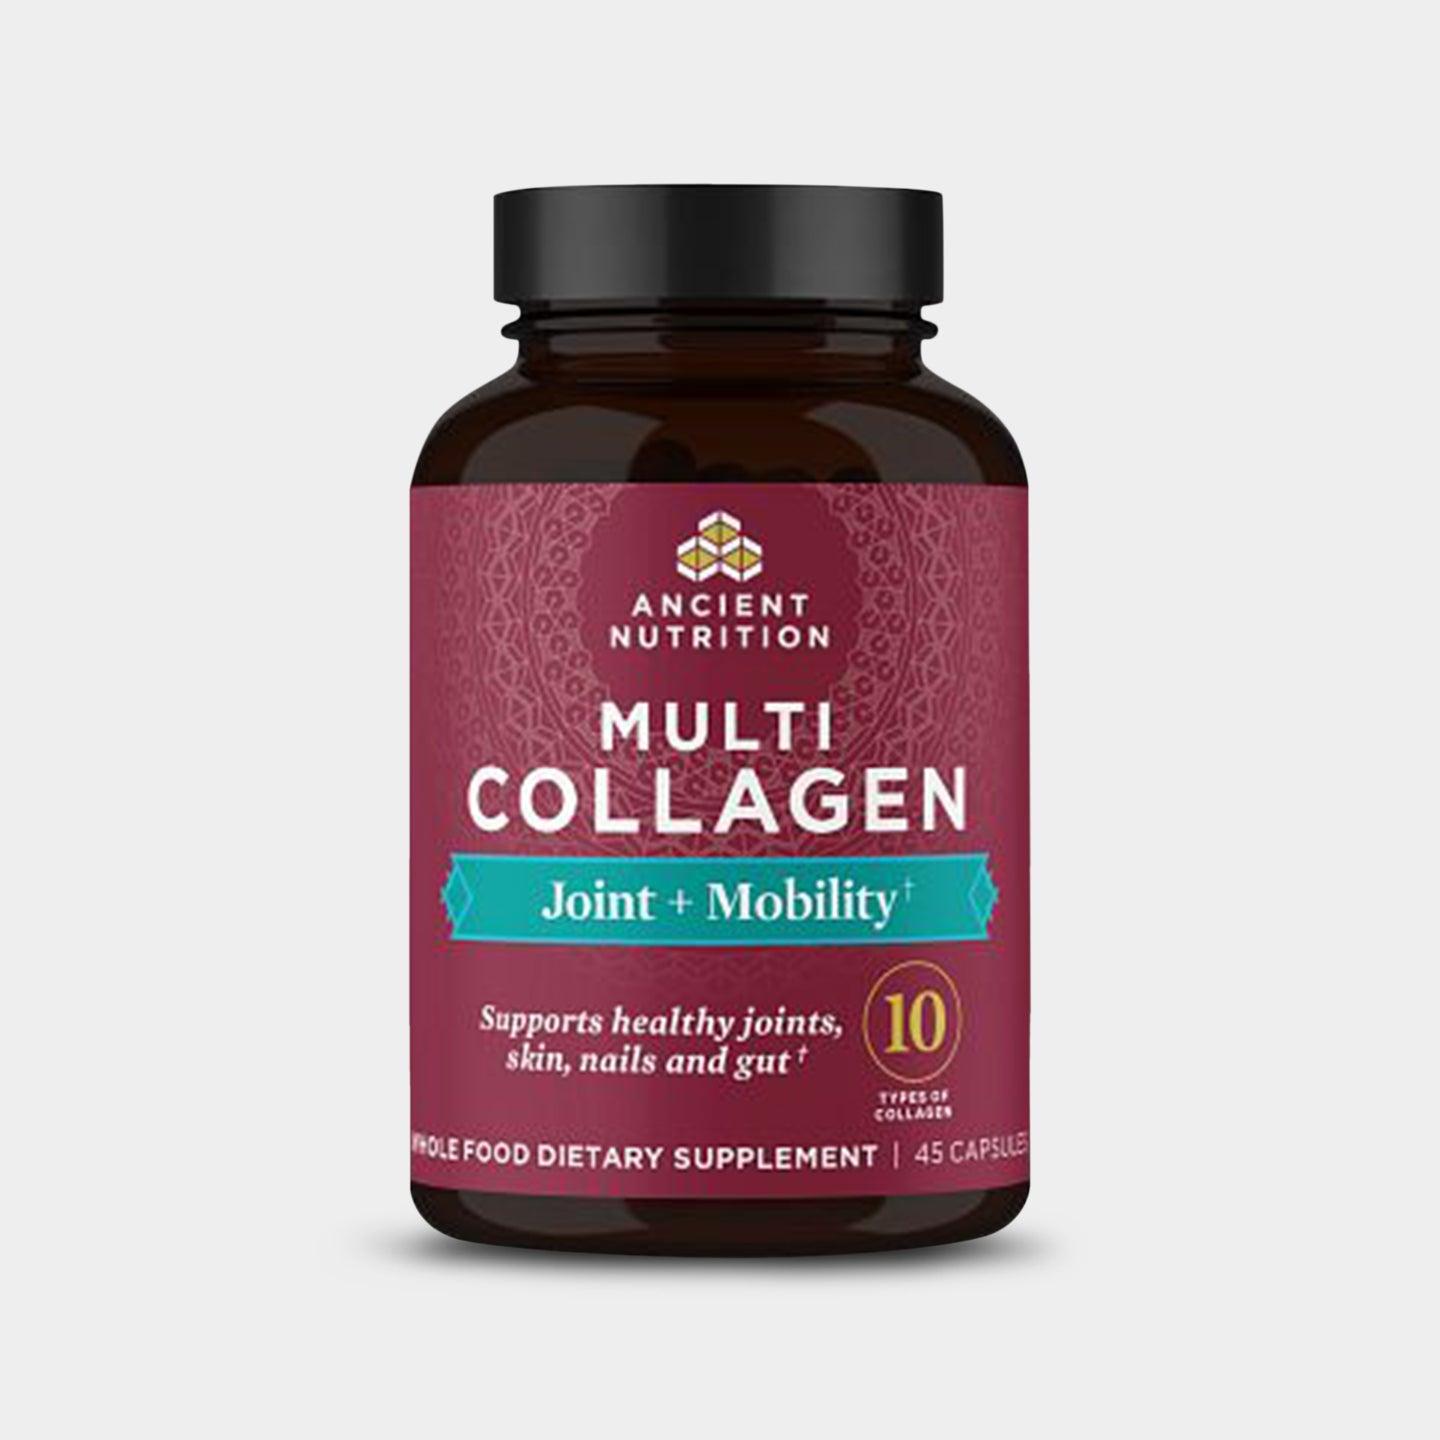 Ancient Nutrition Multi Collagen - Joint + Mobility A1